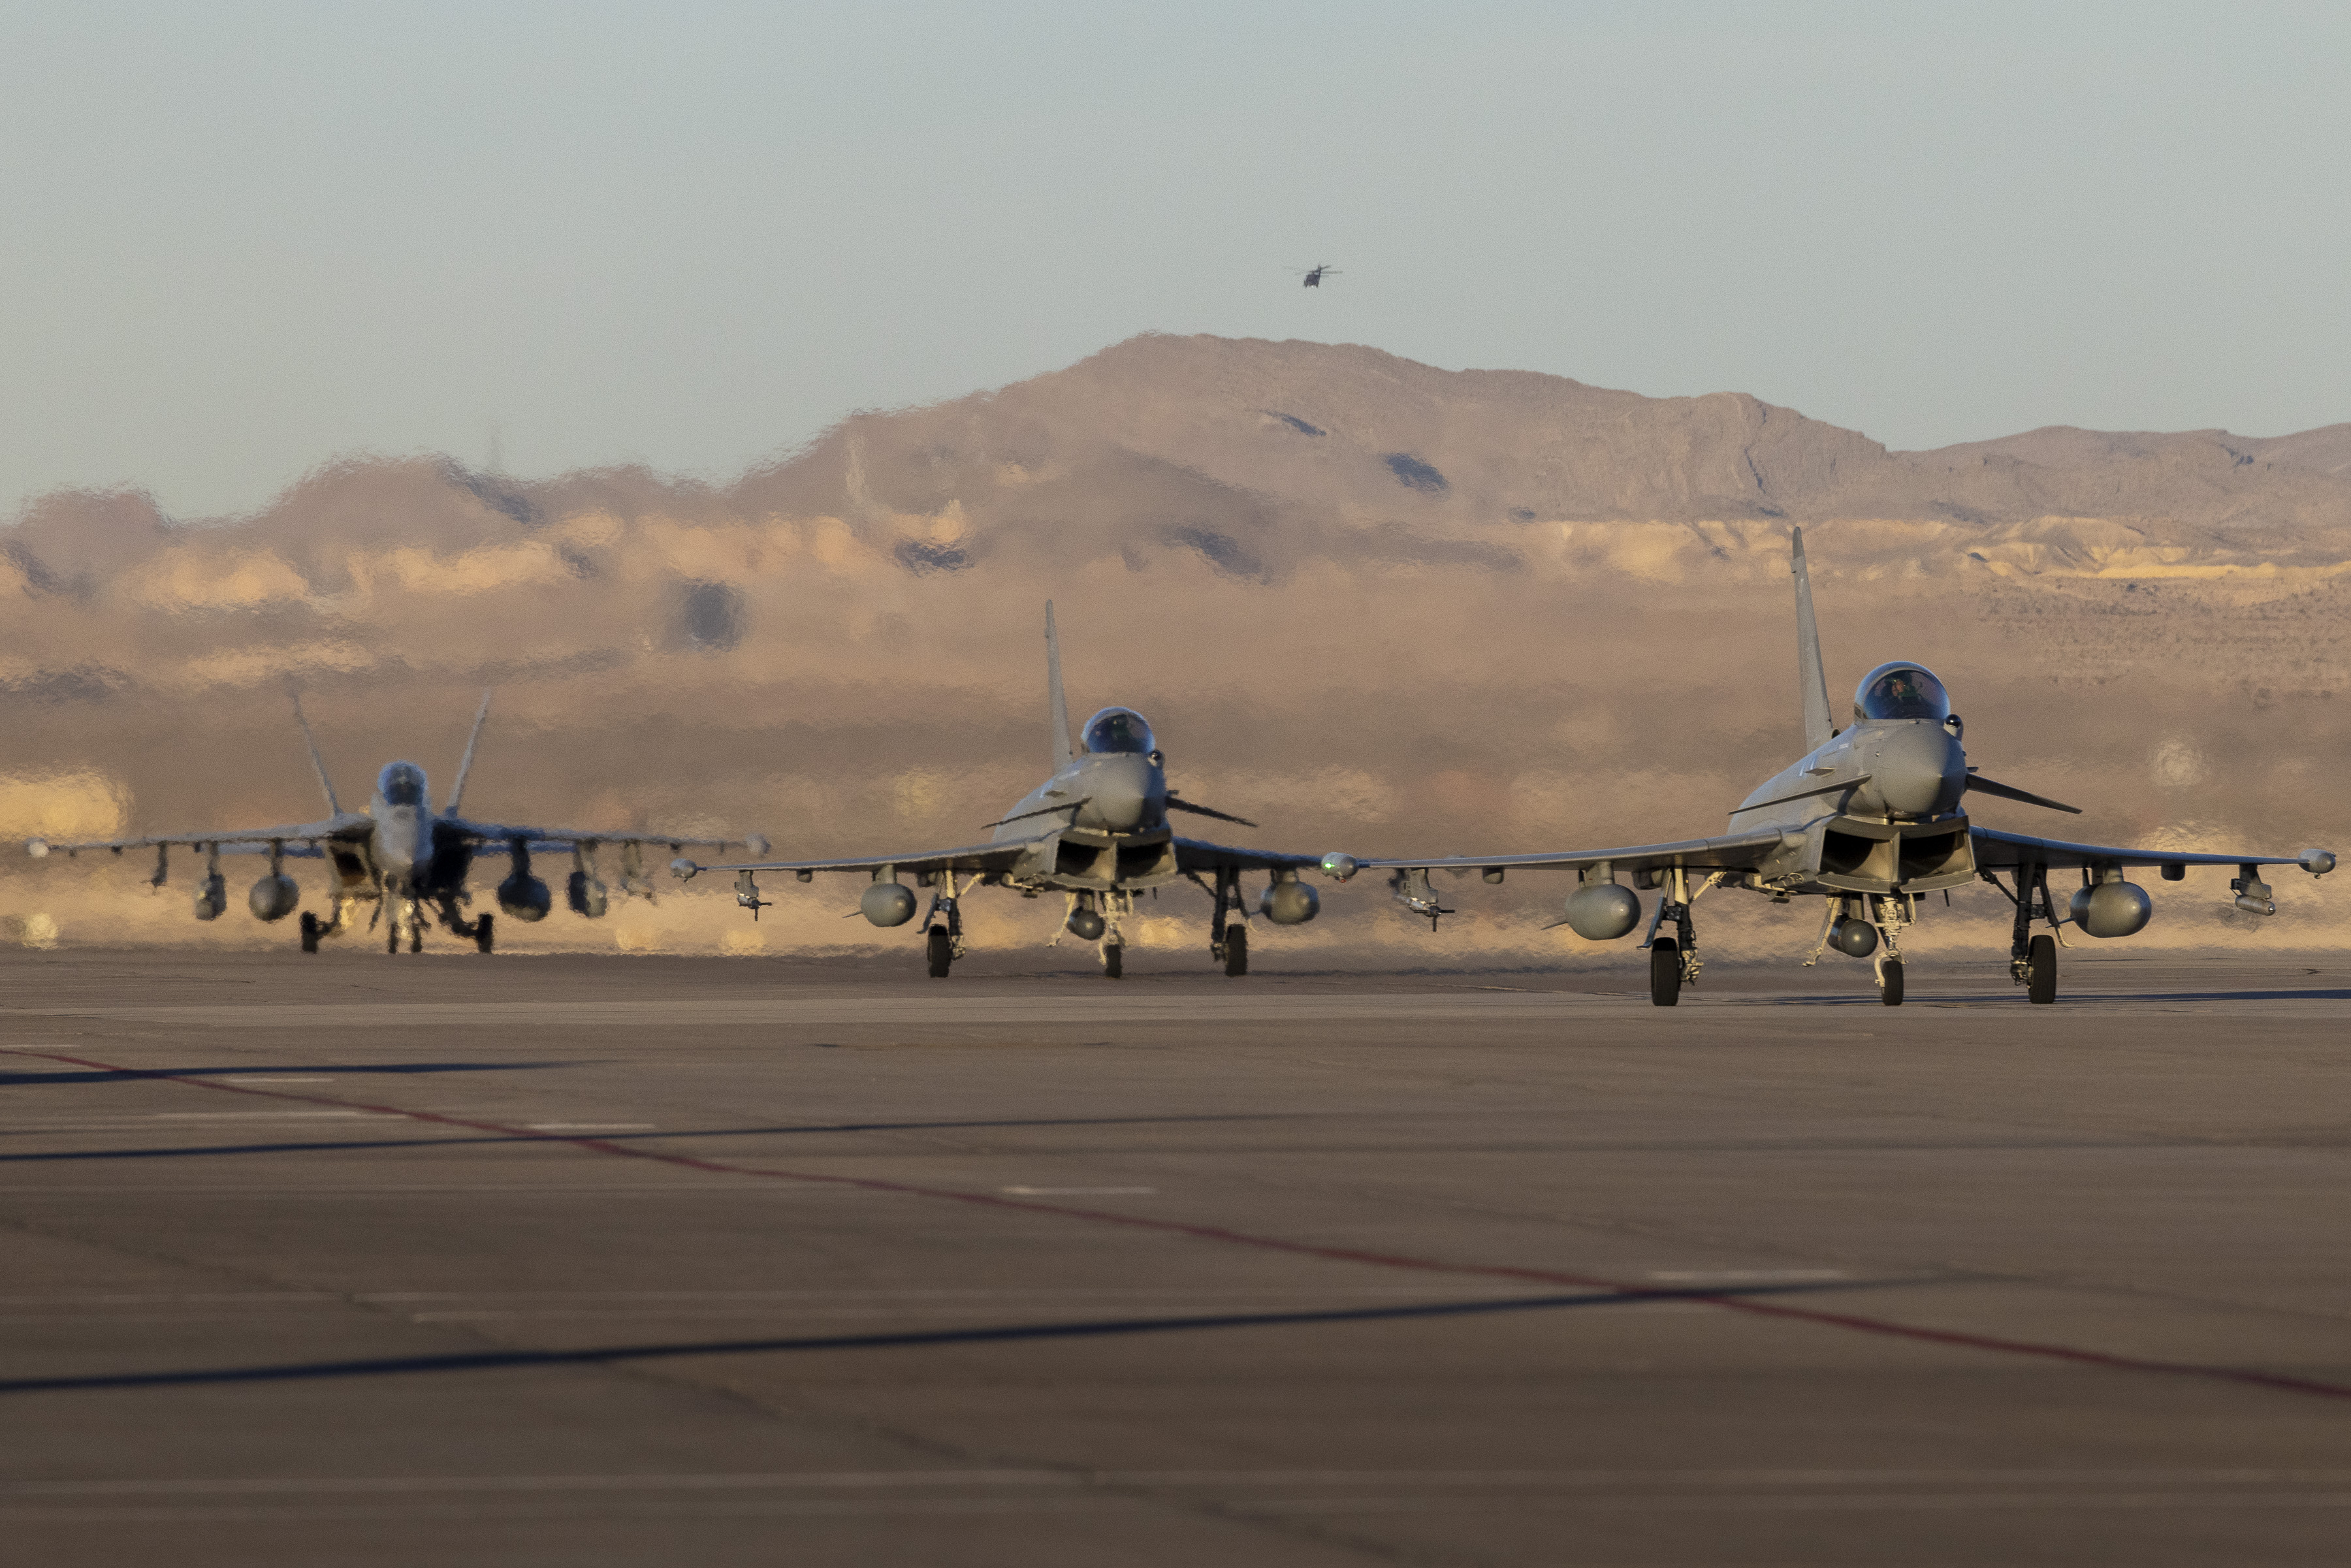 Image shows three RAF Typhoon aircraft rolling along on the airfield.